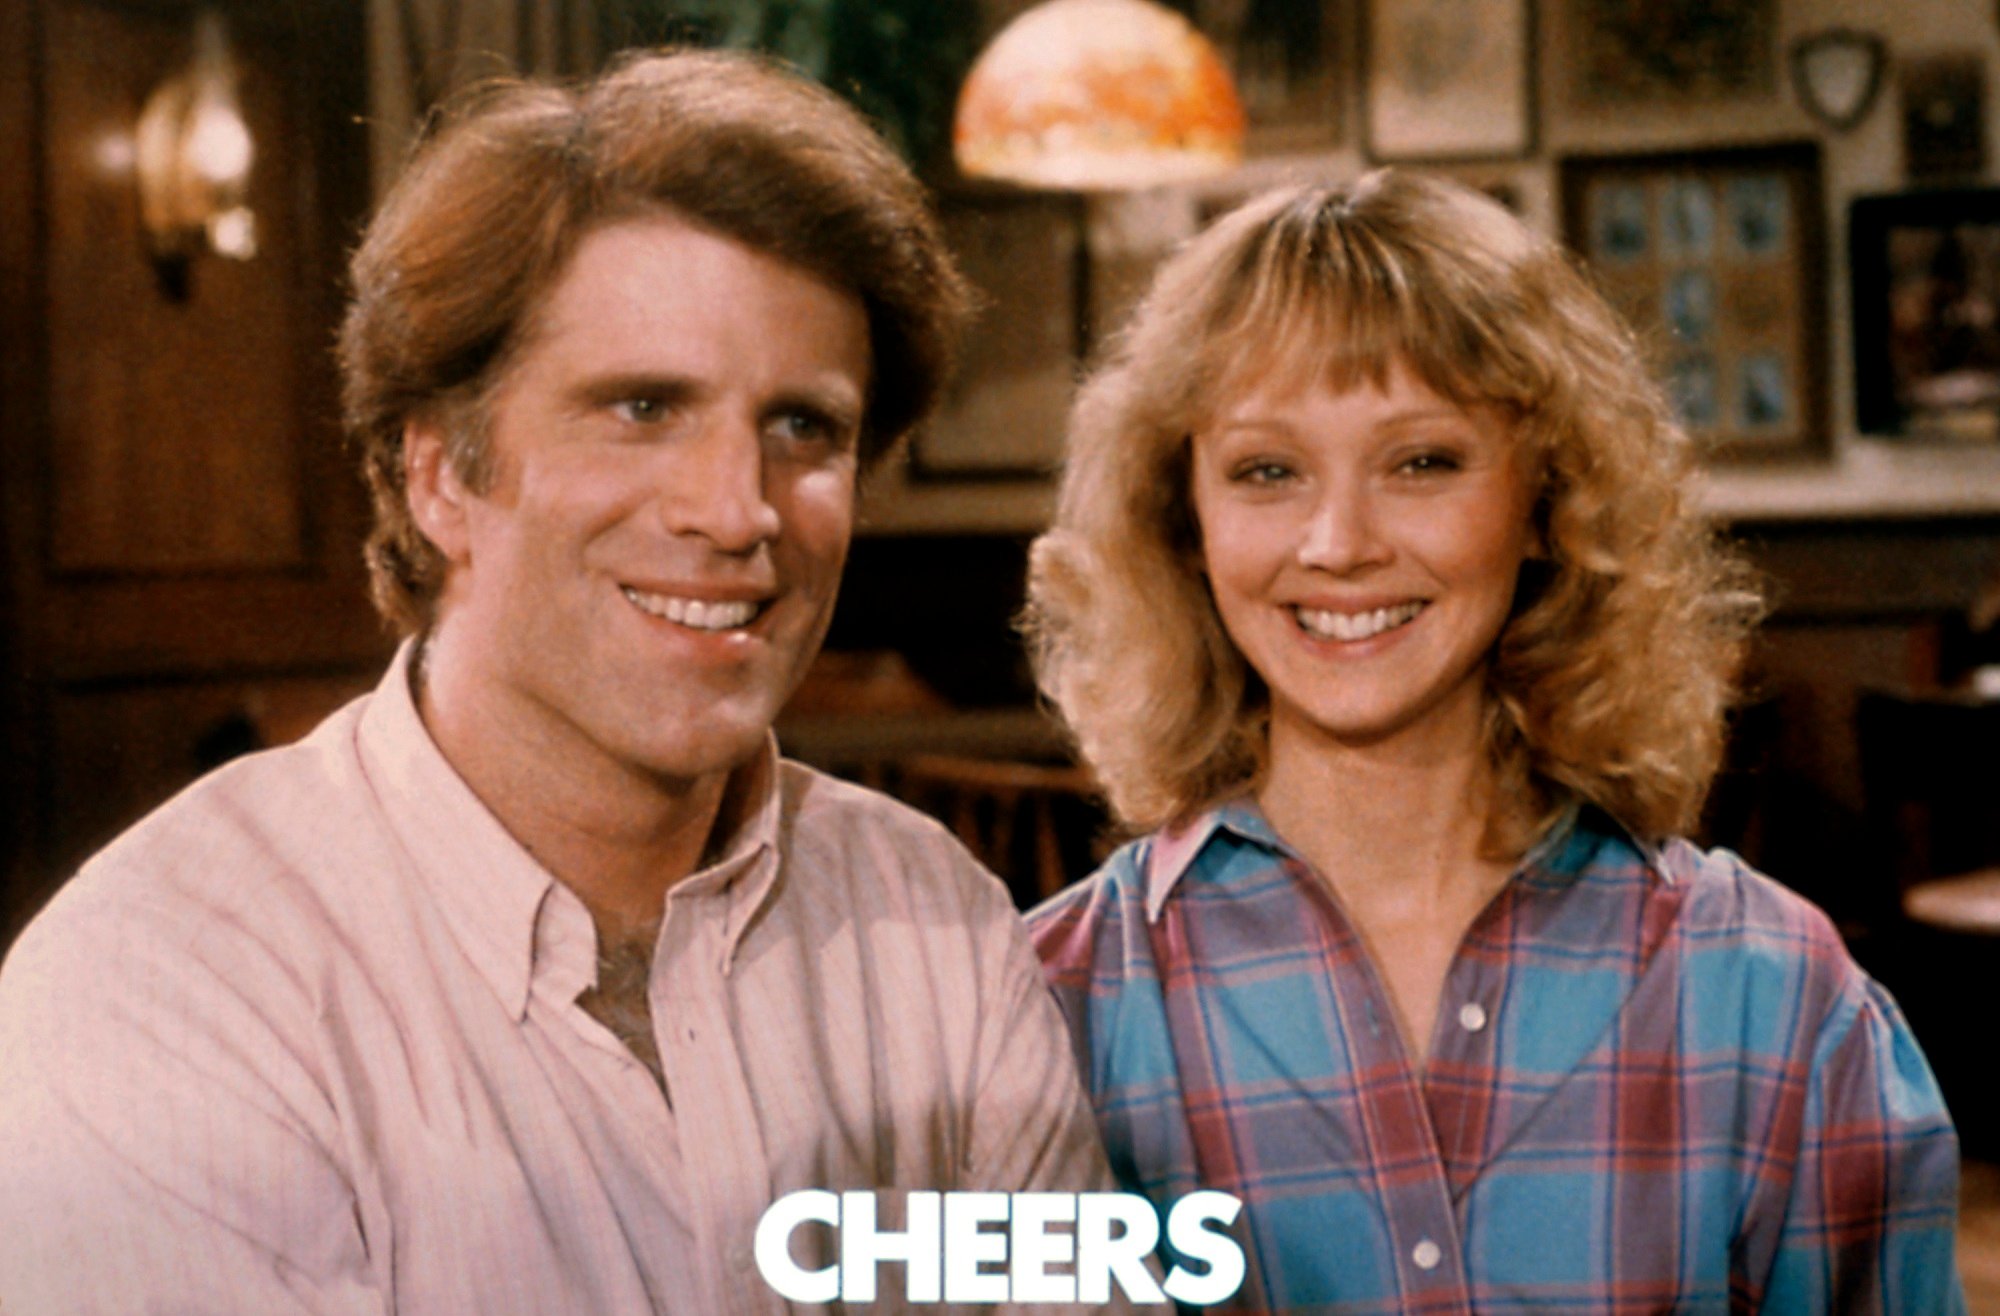 Ted Danson as Sam Malone, Shelley Long as Diane Chambers on Cheers